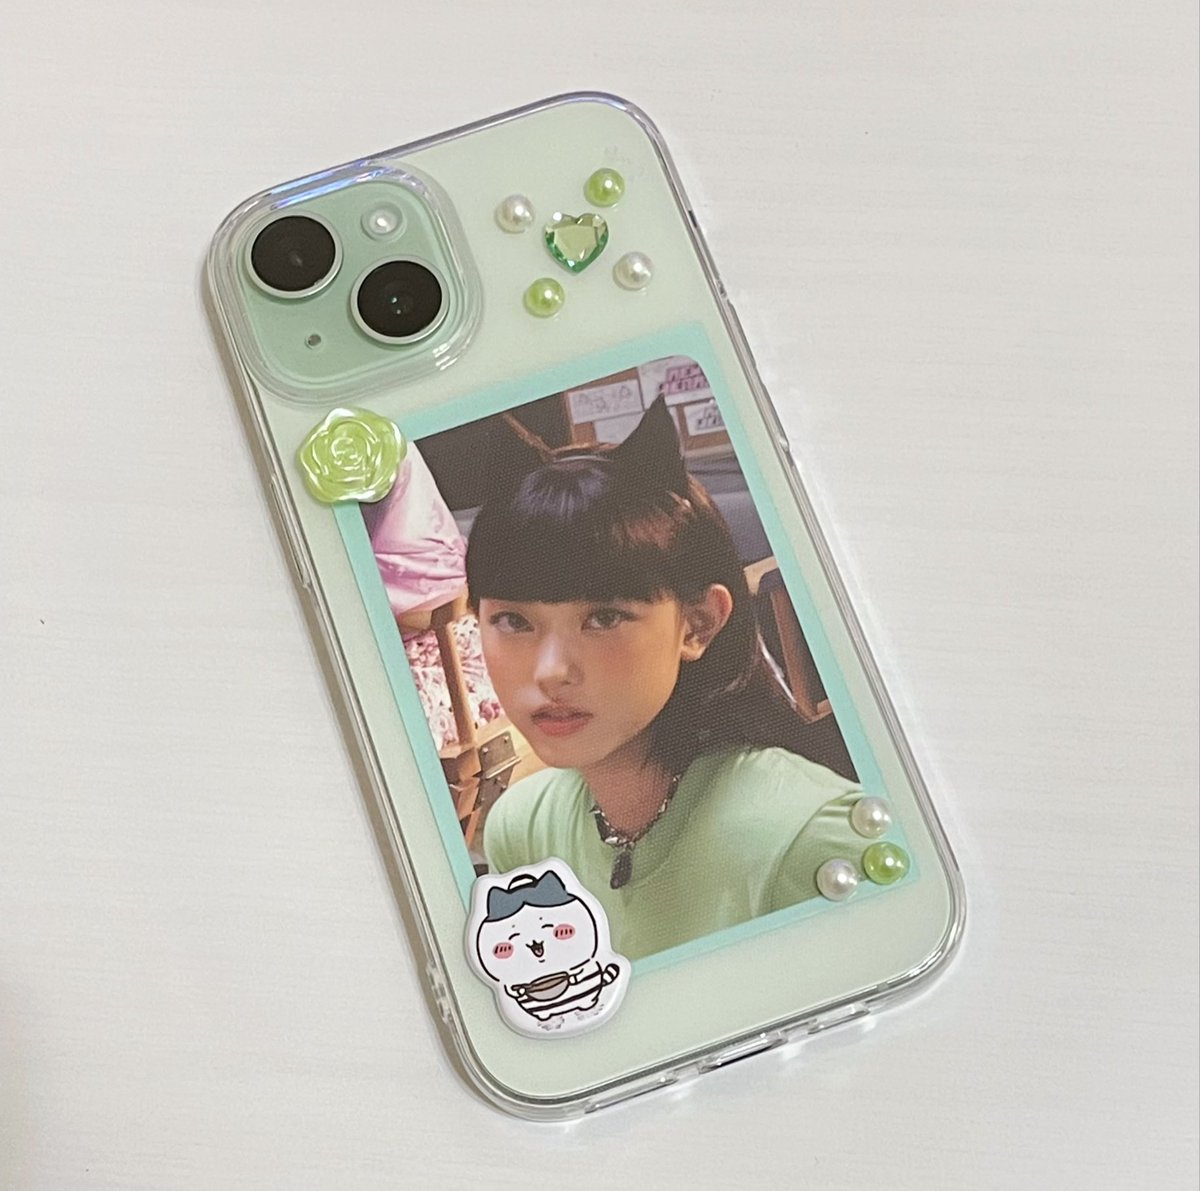 Changed my phone today to iPhone15 and I’m glad I chose green cause I’m in love with the color
also decorated my case with dollarstore stickers cause this is gonna be my temporary case until the one I ordered comes but I think it turned out cute